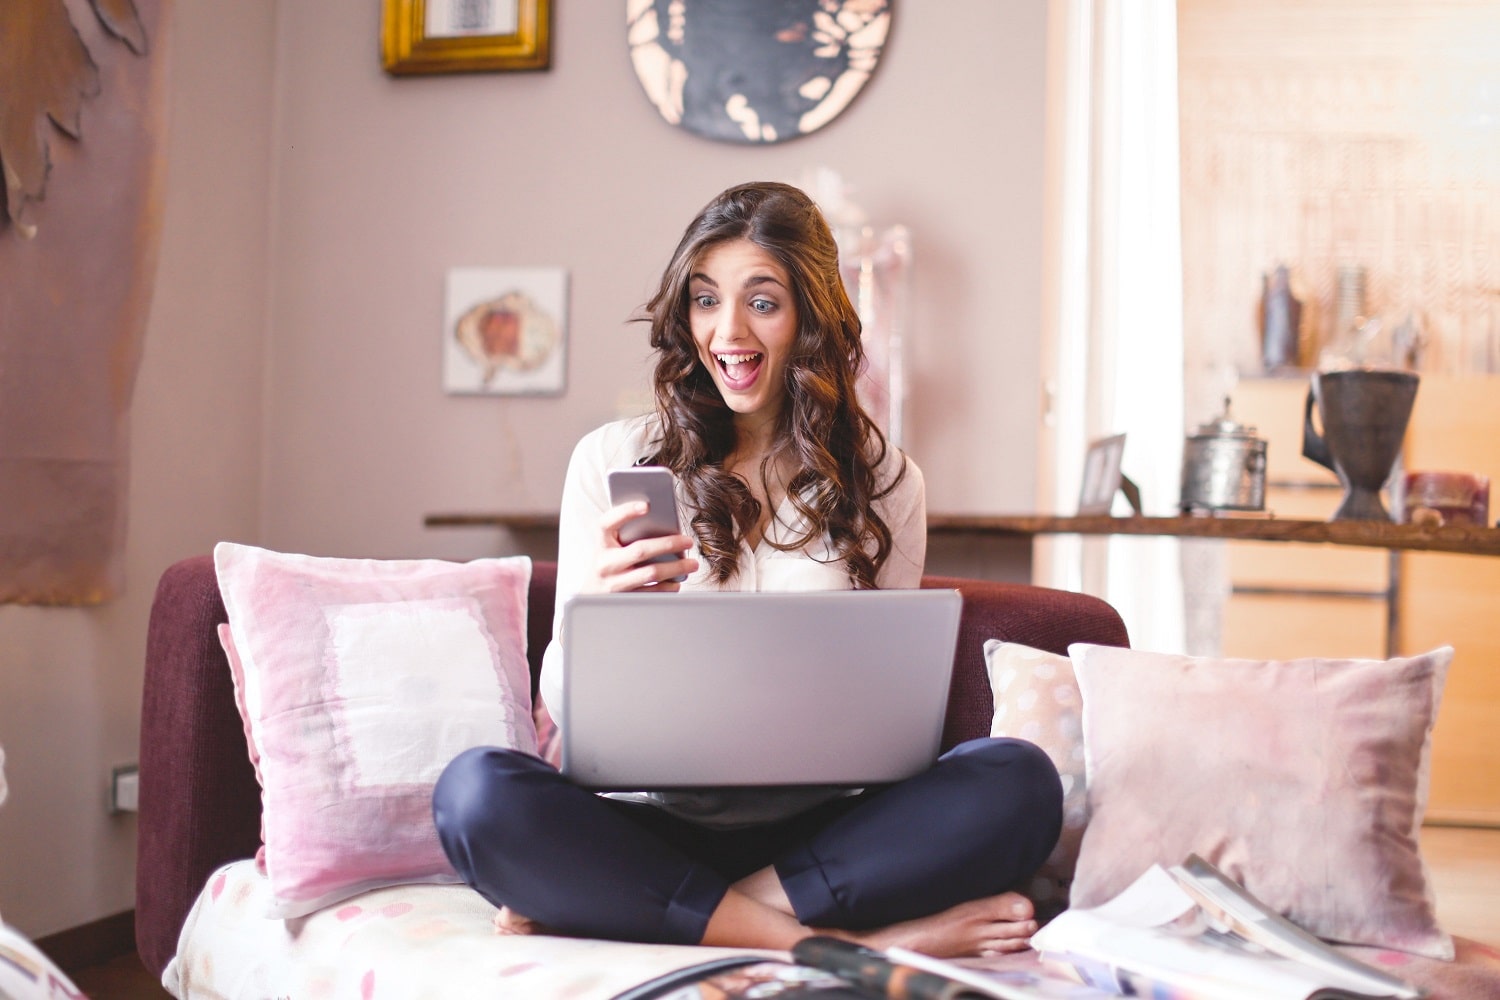 Happy woman on a sofa, using her laptop to sell products on Amazon.